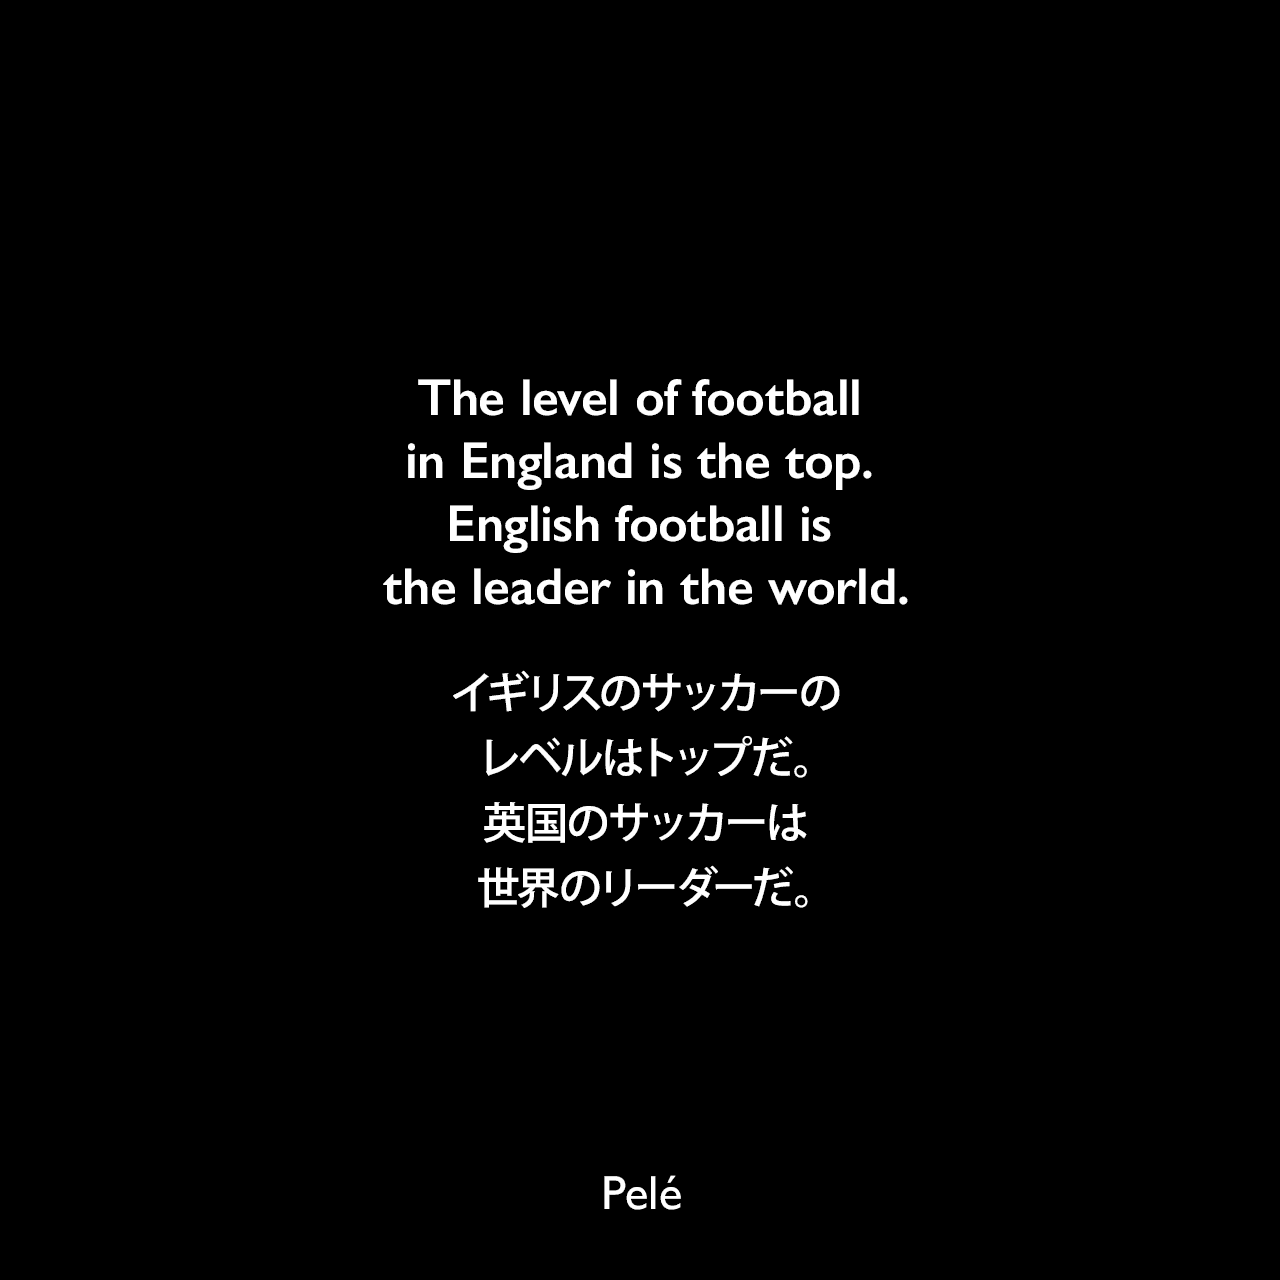 The level of football in England is the top. English football is the leader in the world.イギリスのサッカーのレベルはトップだ。英国のサッカーは世界のリーダーだ。Pelé